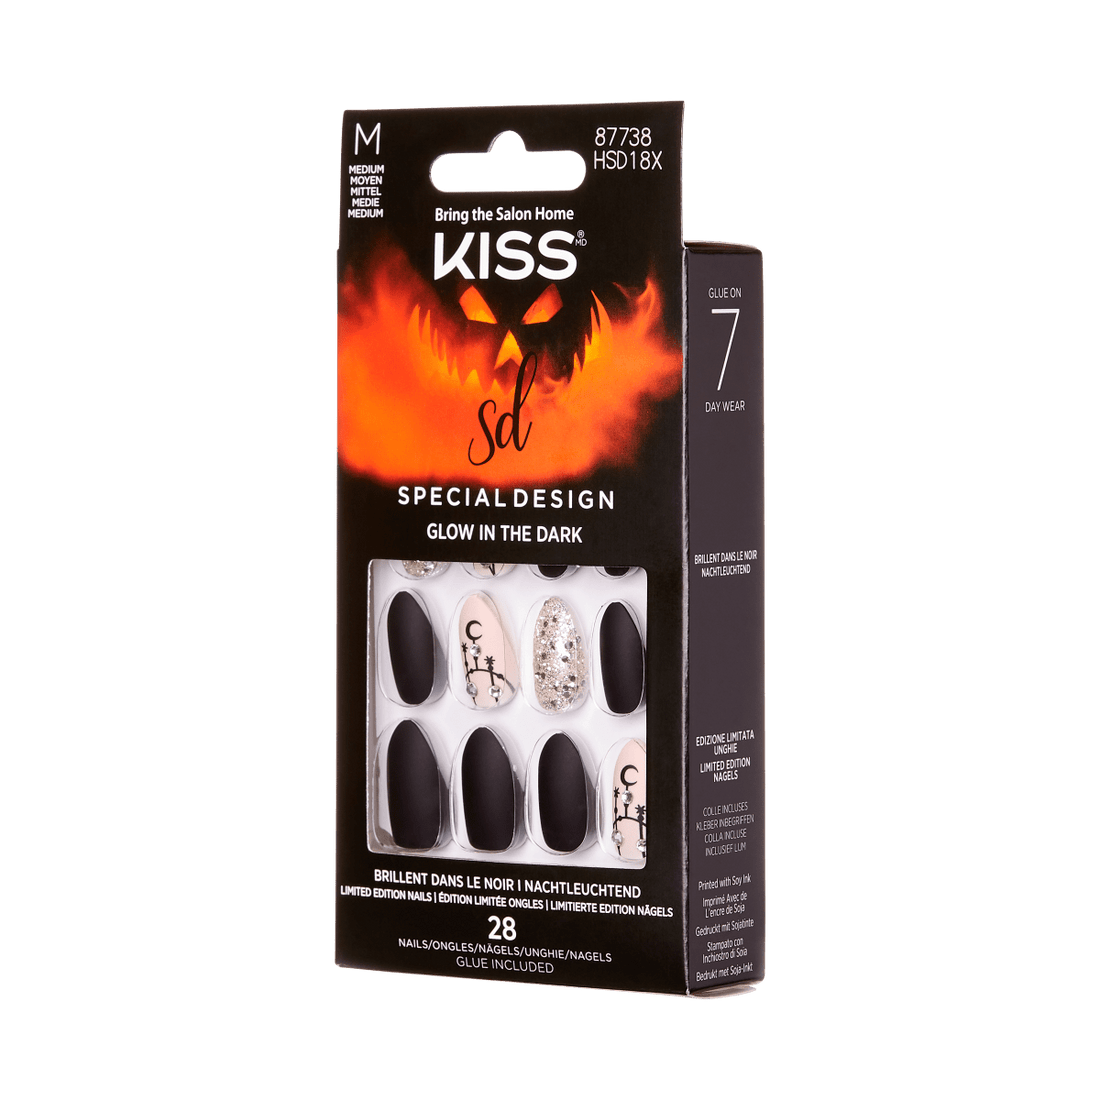 KISS Special Design, Press-On Nails, Scary Skeletons, Black, Med Almond, 28ct